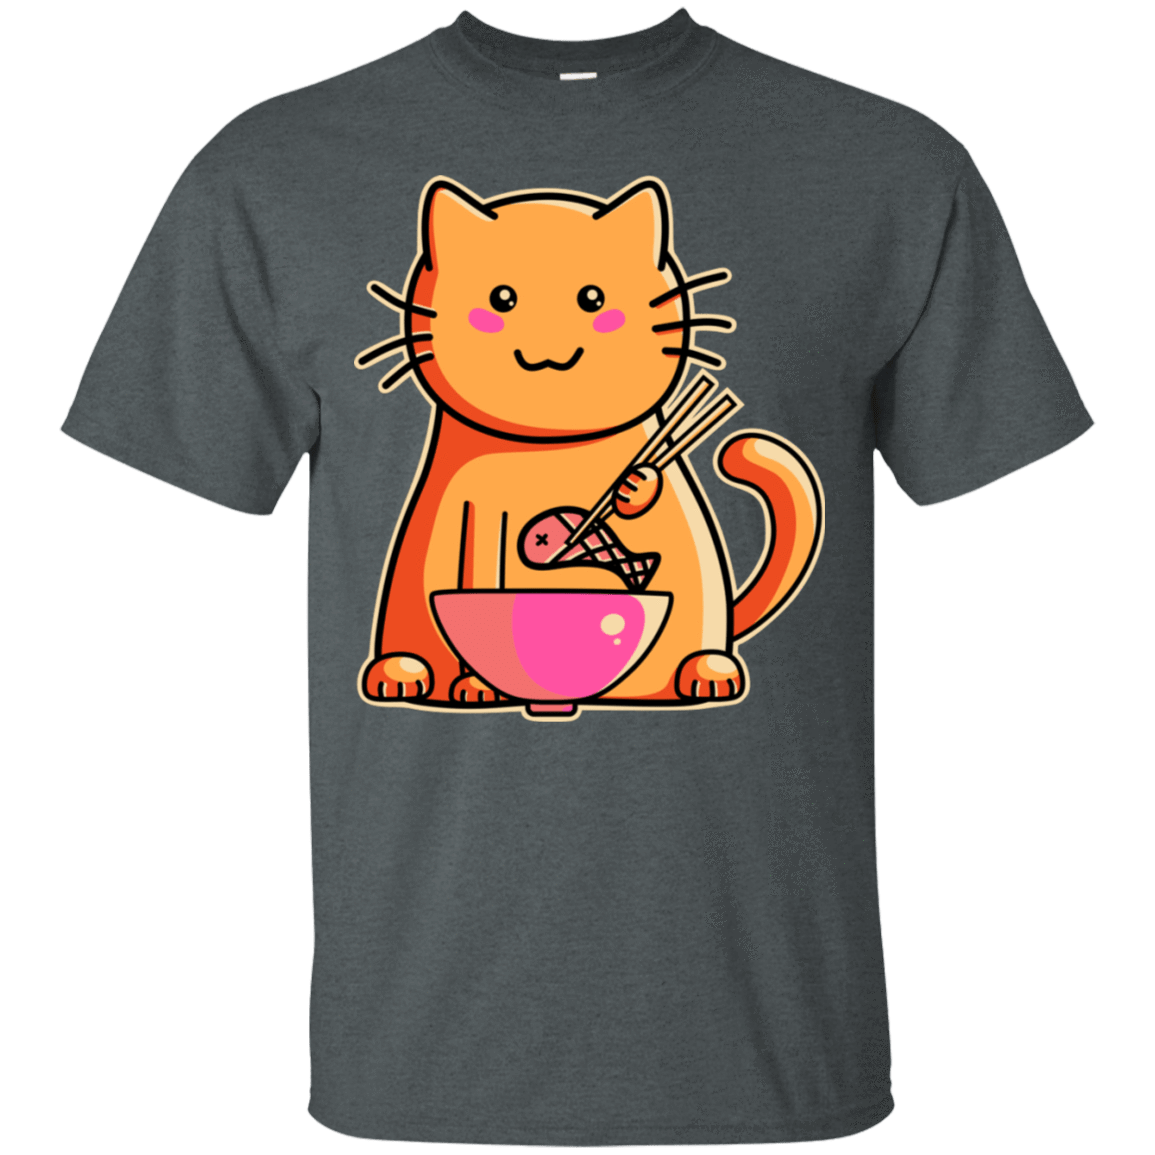 T-Shirts Dark Heather / S Cats Favourite Meal T-Shirt